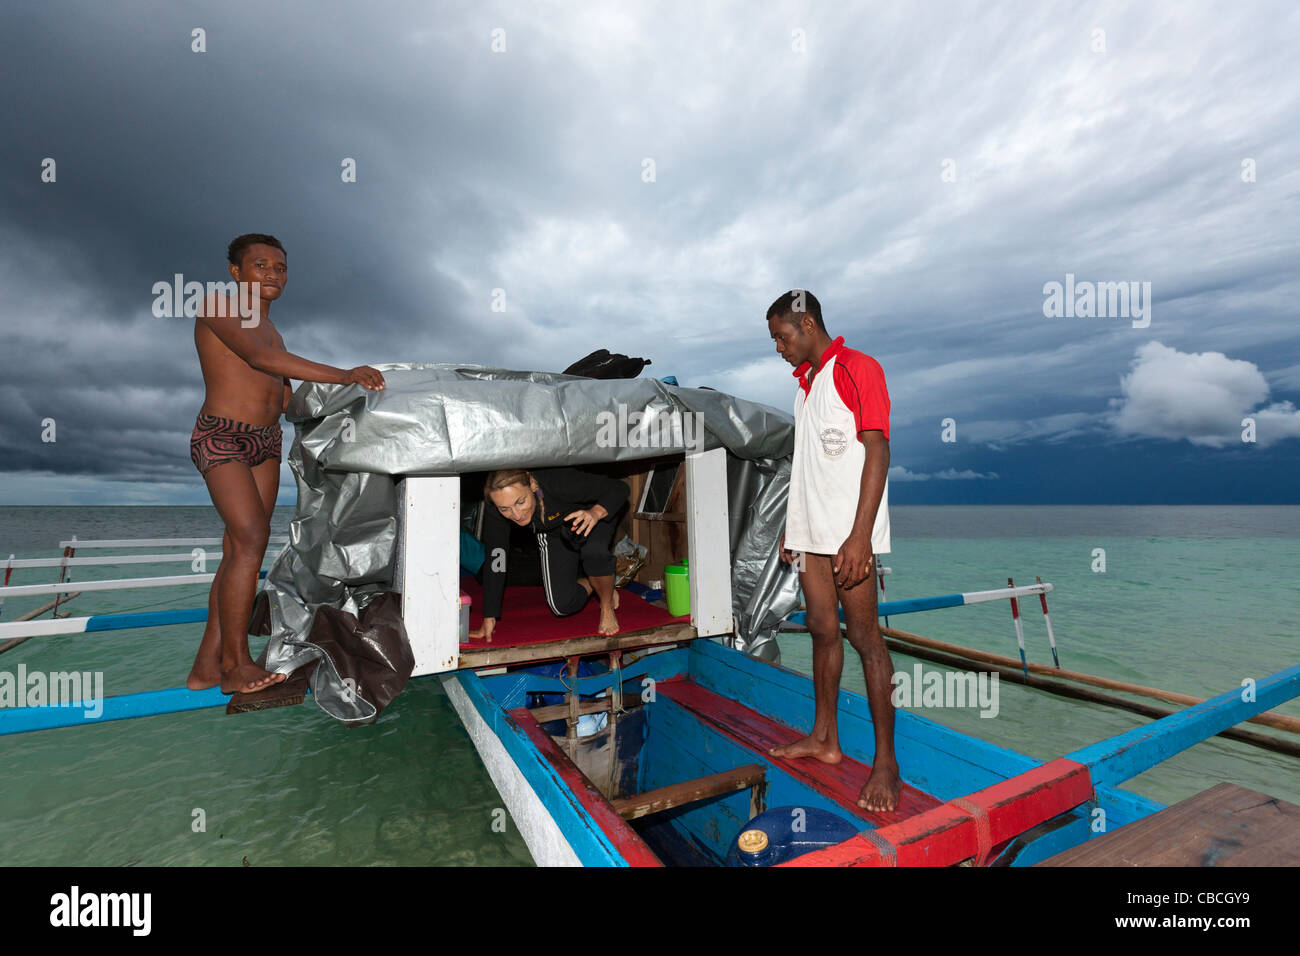 Photographer camp on Outrigger Boat, Cenderawasih Bay, West Papua, Indonesia Stock Photo